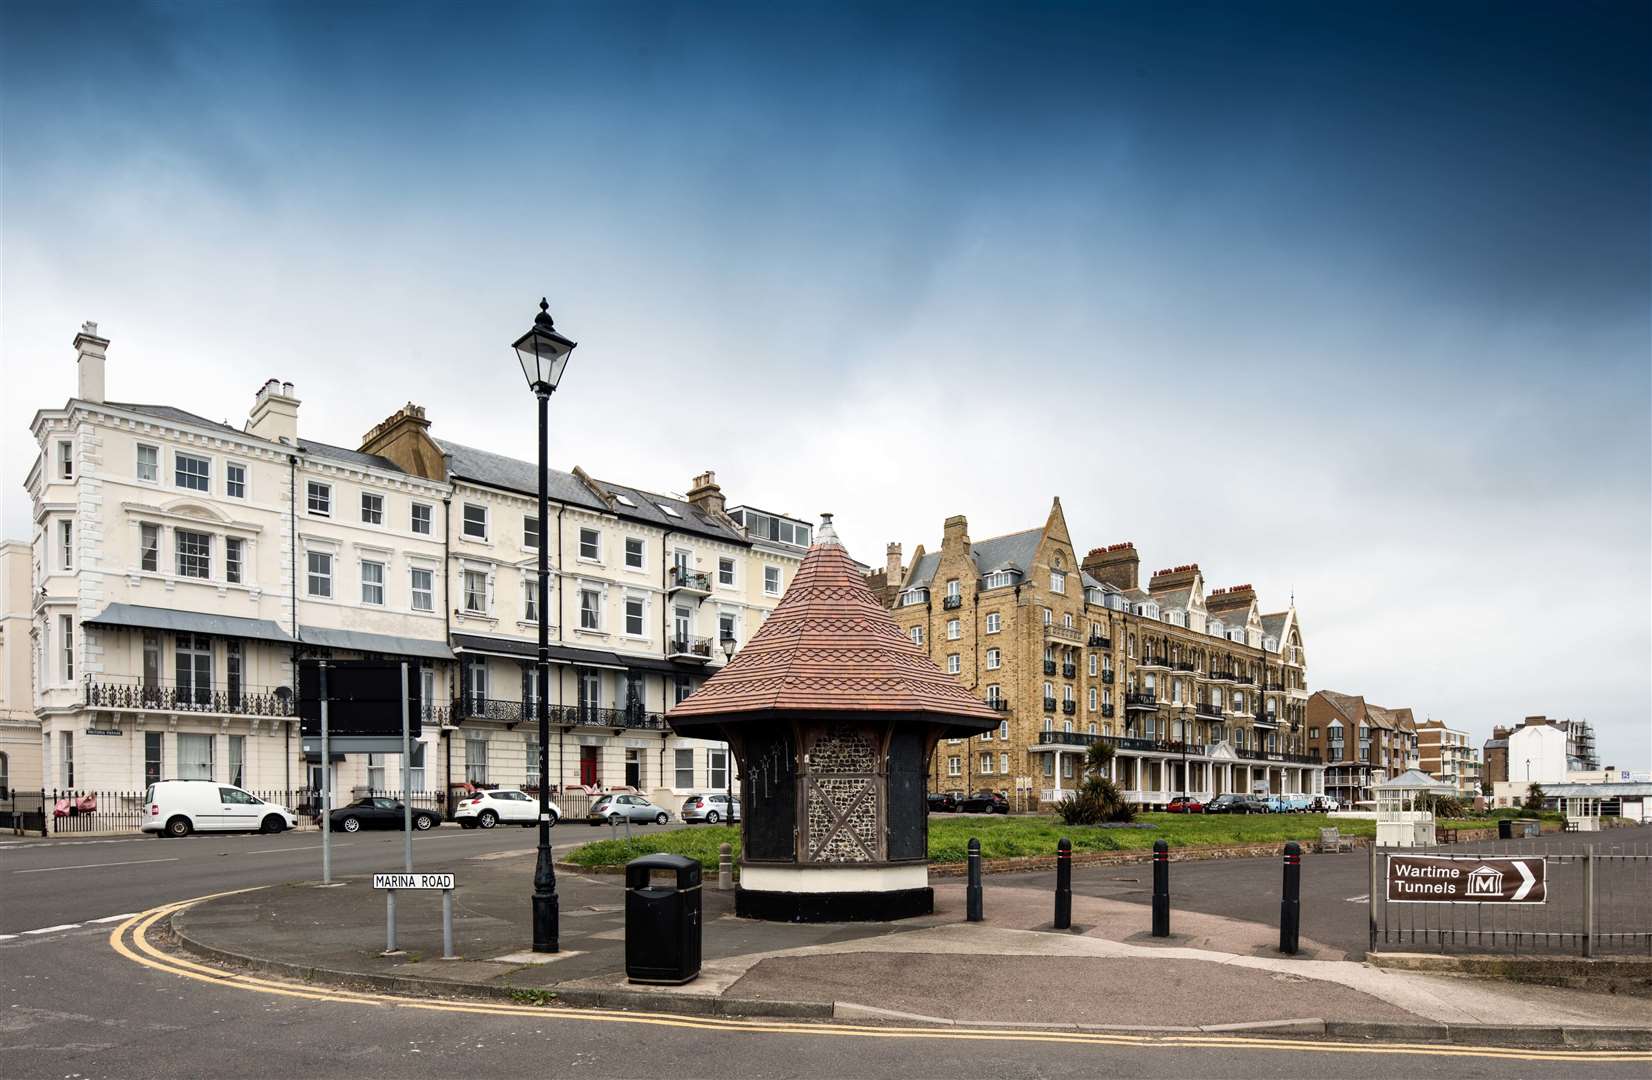 The old entry kiosk at the Victoria Gardens on Ramsgate seafront is now a listed structure. Picture: Historic England (11462684)